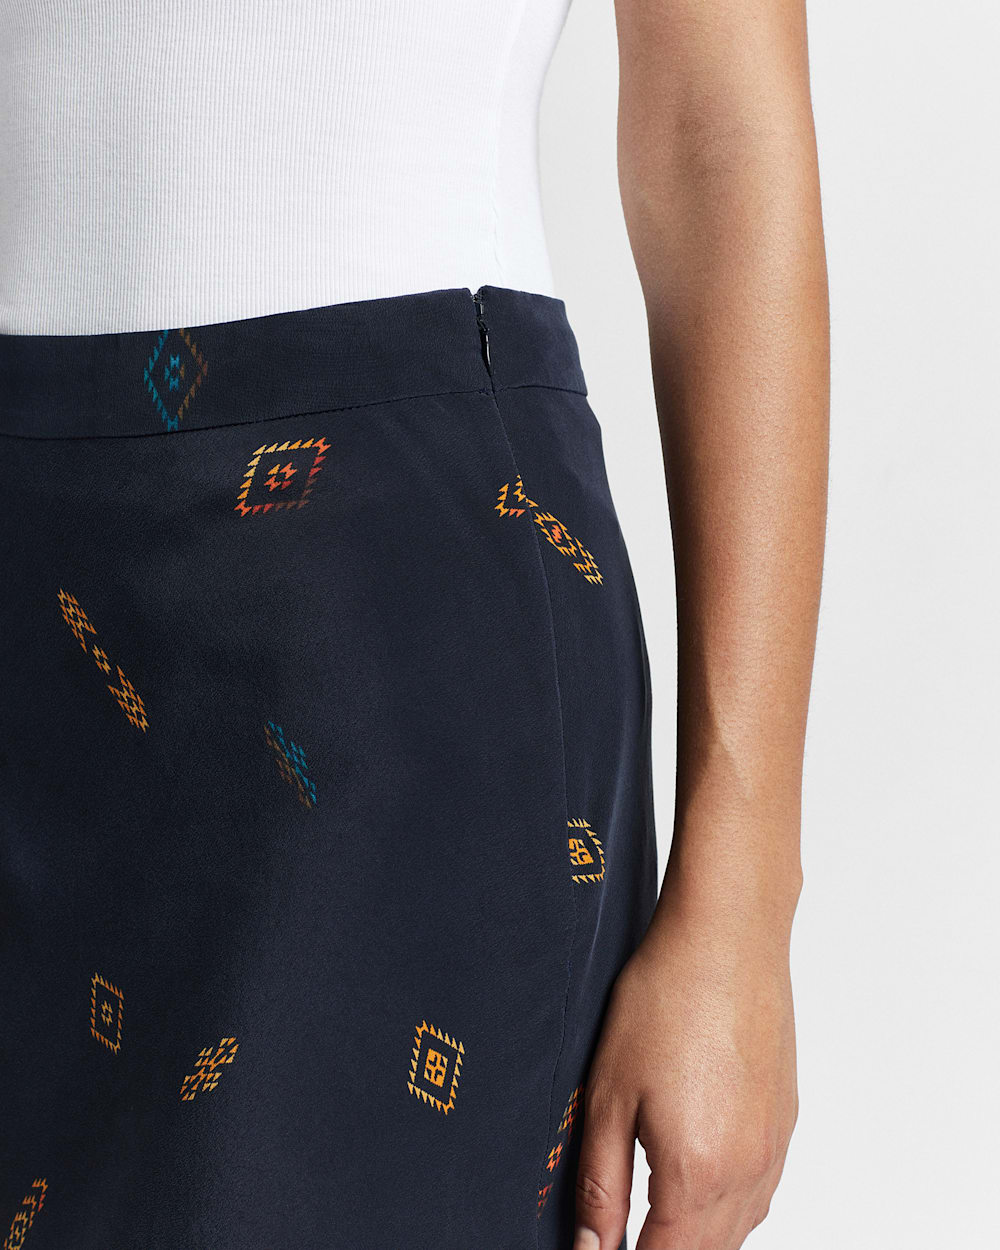 ALTERNATE VIEW OF WASHABLE SILK MIDI SKIRT IN MIDNIGHT NAVY MULTI image number 4